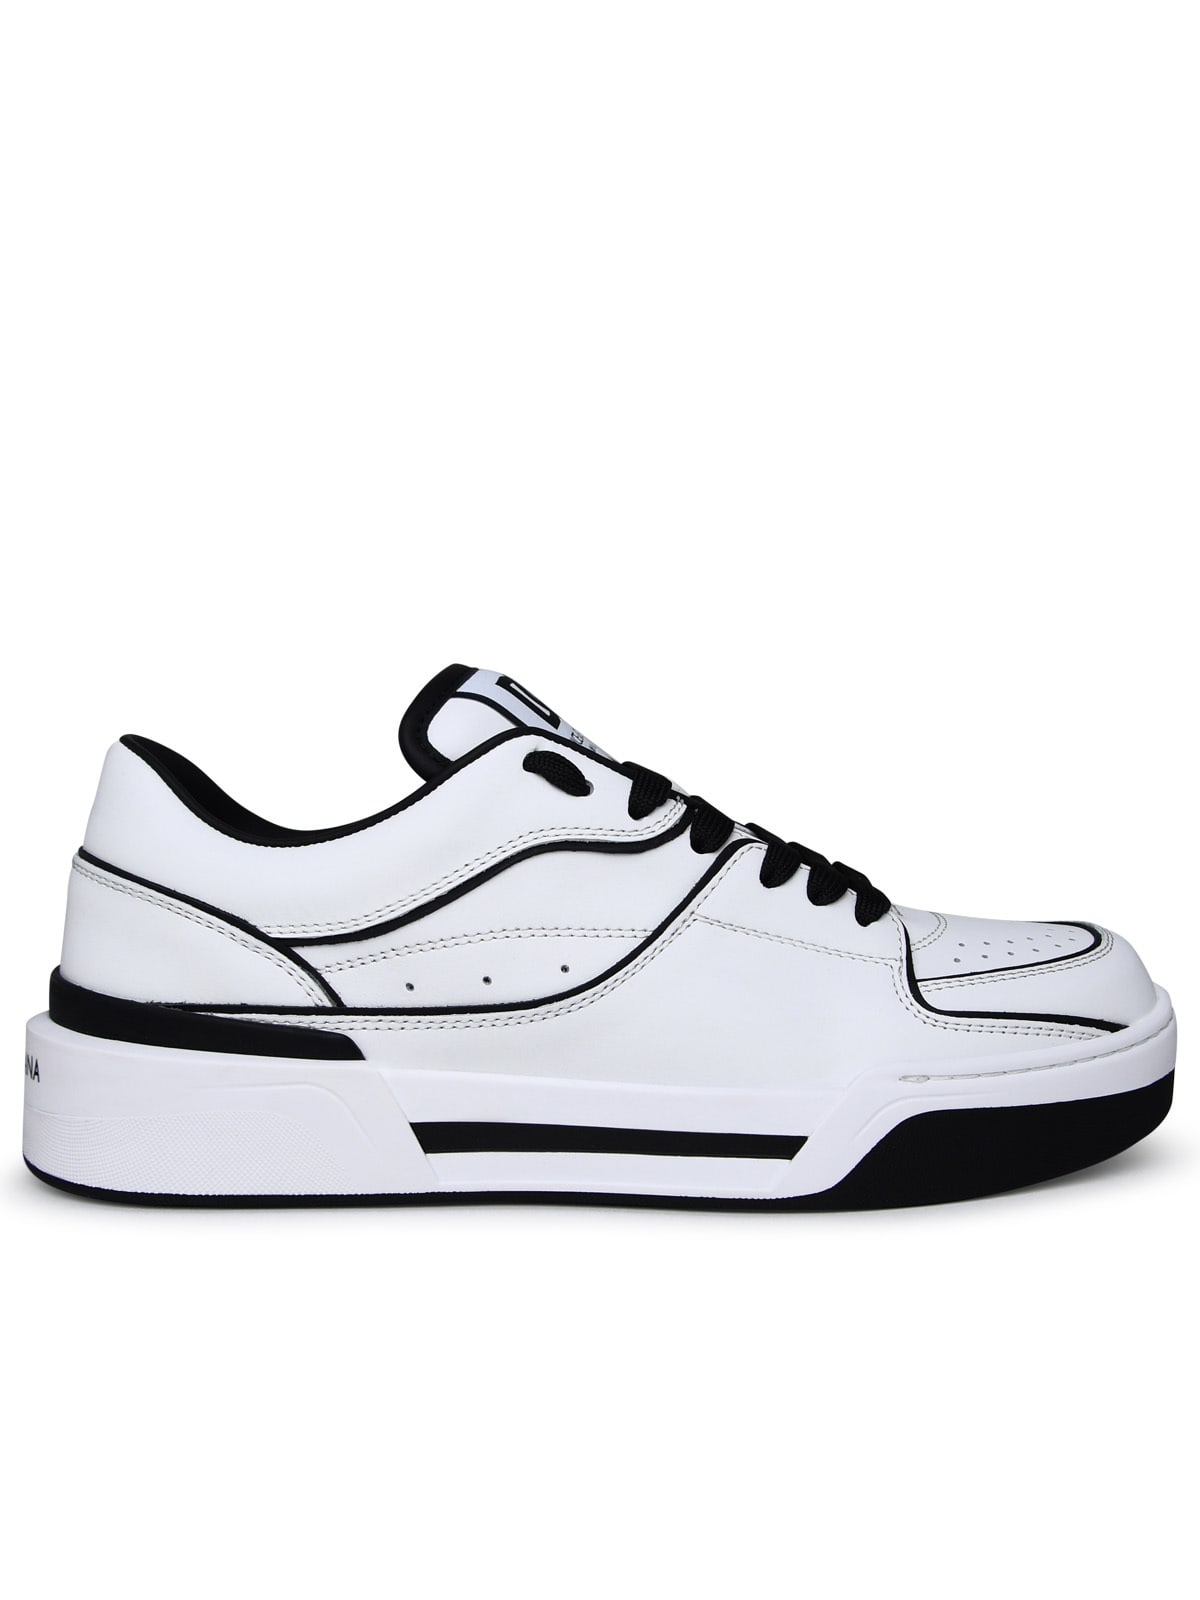 DOLCE & GABBANA NEW ROMA WHITE LEATHER SNEAKERS